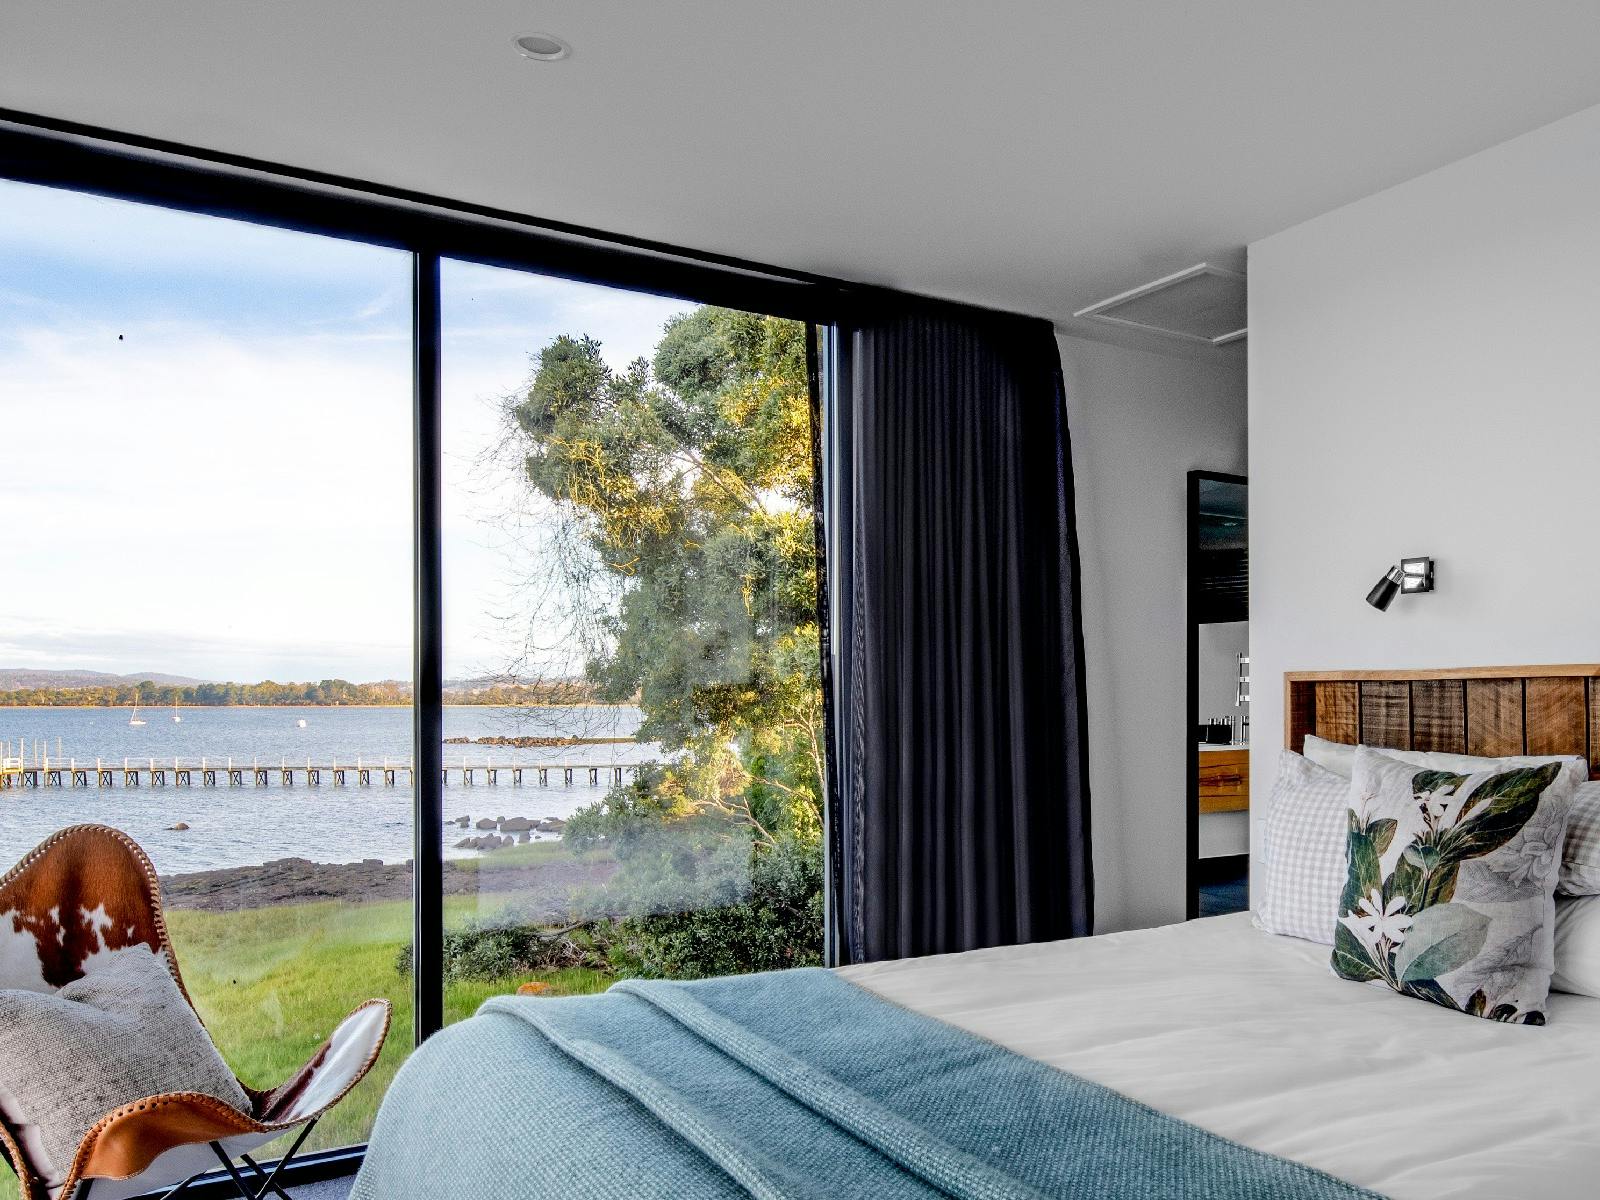 The main bedroom has 90 degree views of the river including a lovely vista of the old jetty.